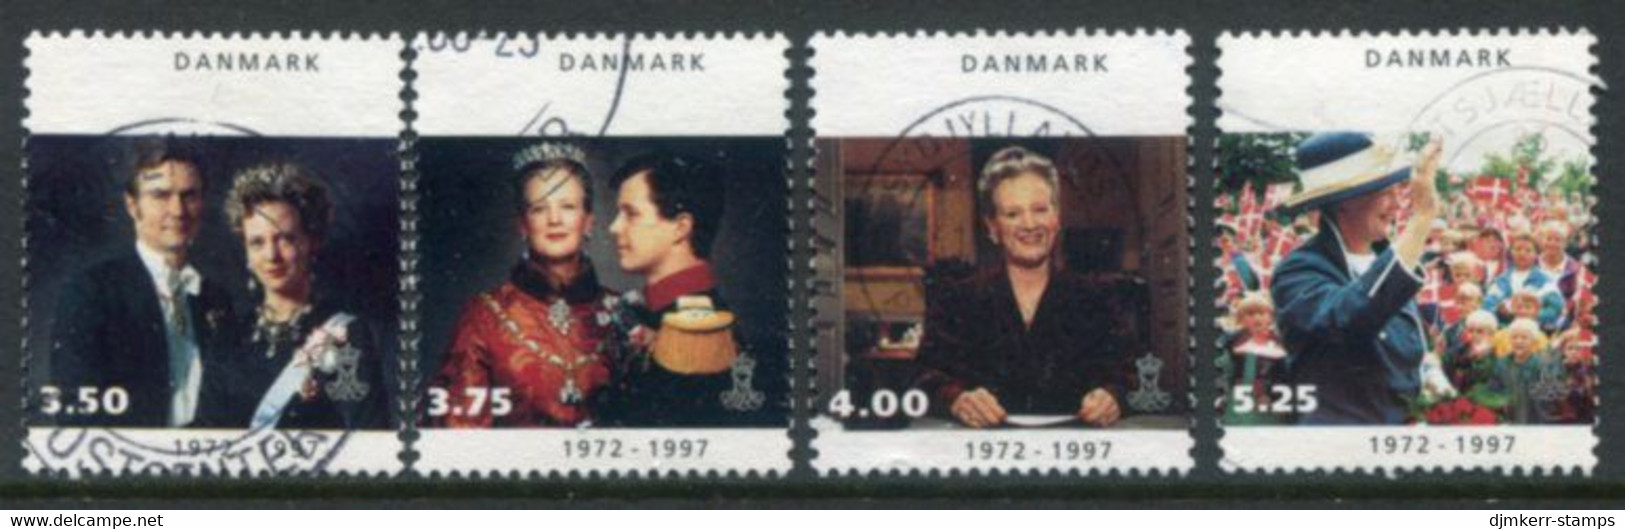 DENMARK 1997 25th Anniversary Of Regency Used.  Michel 1142-45 - Used Stamps